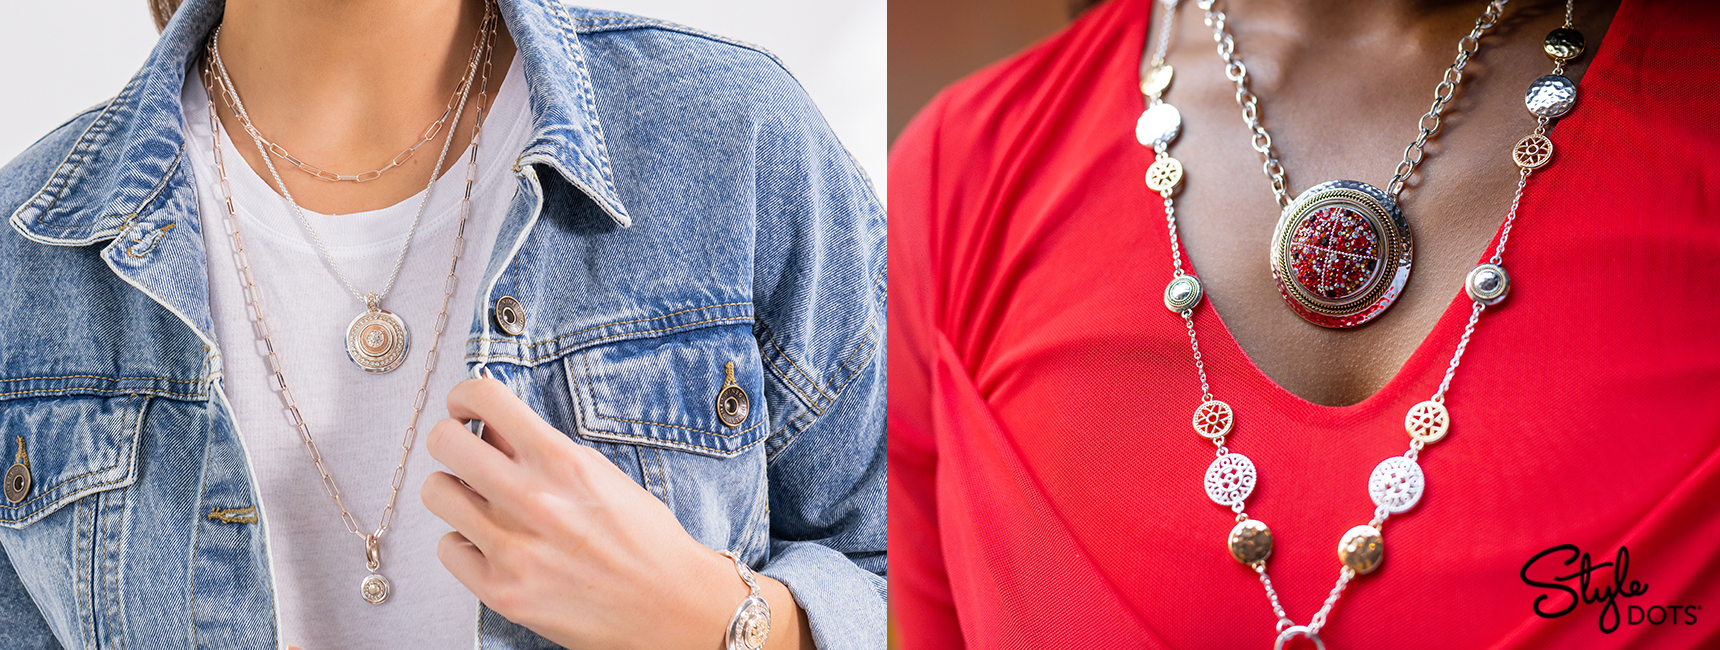 Models wear two or three necklaces together in a layered look.